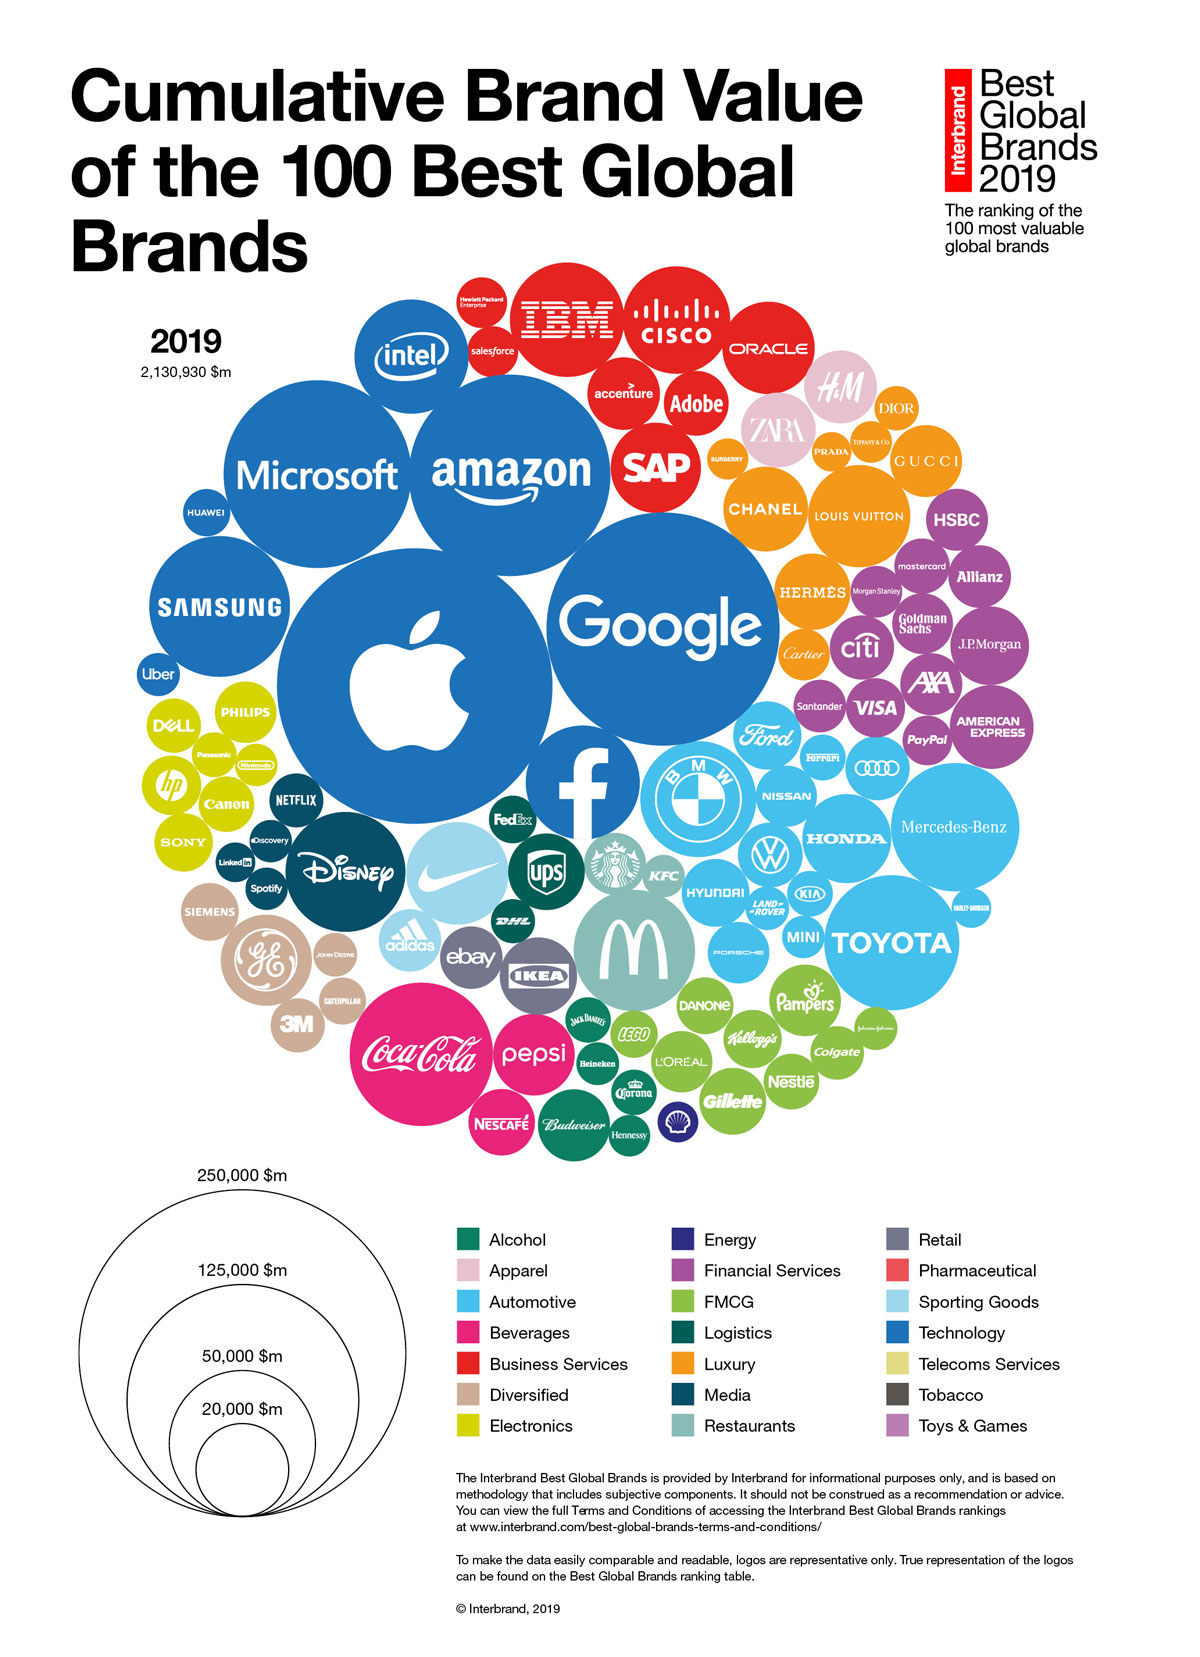 The ranking of the 100 Best Global Brands